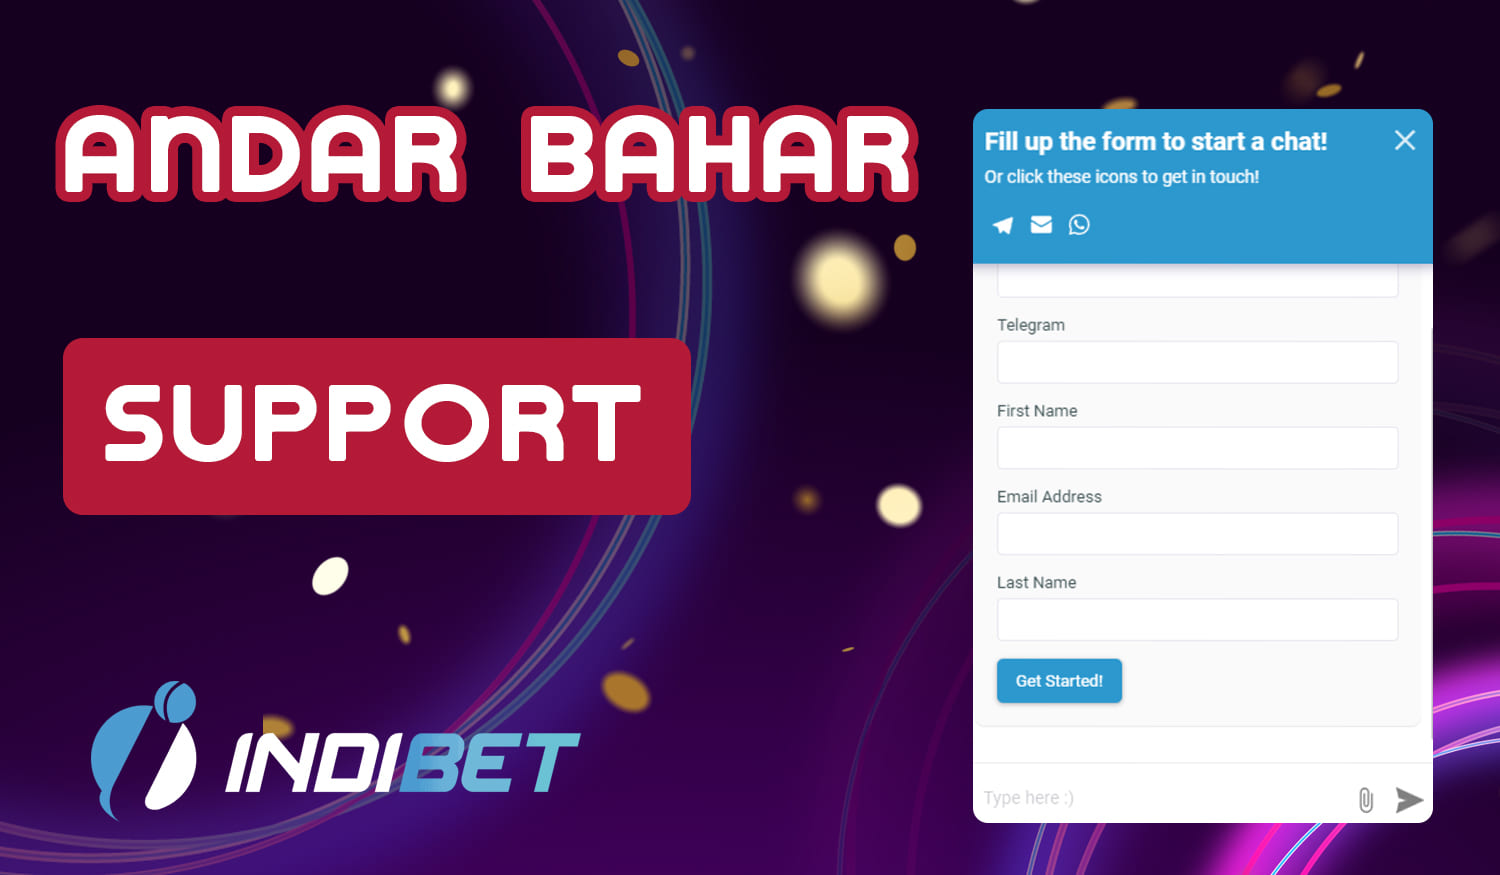 Ways available for Indian users to contact Indibet support team